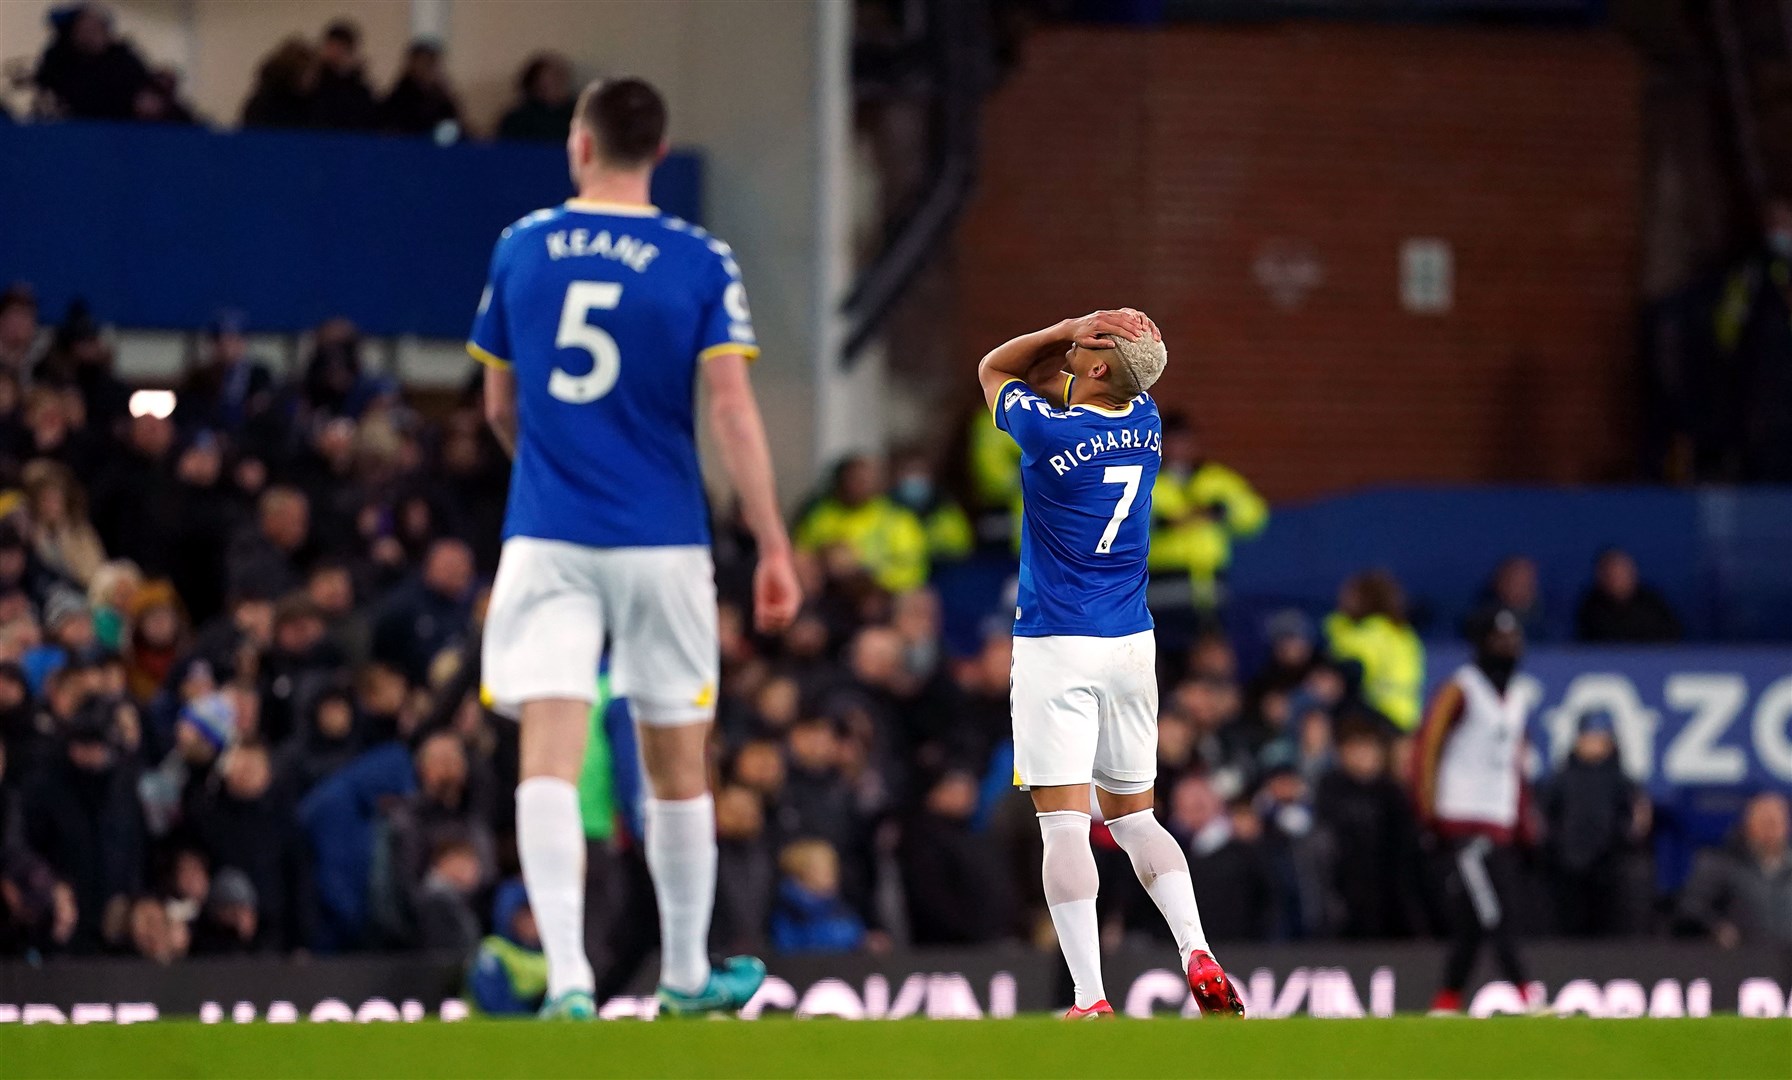 Everton’s Richarlison reacts after having a second goal against Arsenal ruled out by VAR at Goodison Park last season (Martin Rickett/PA)